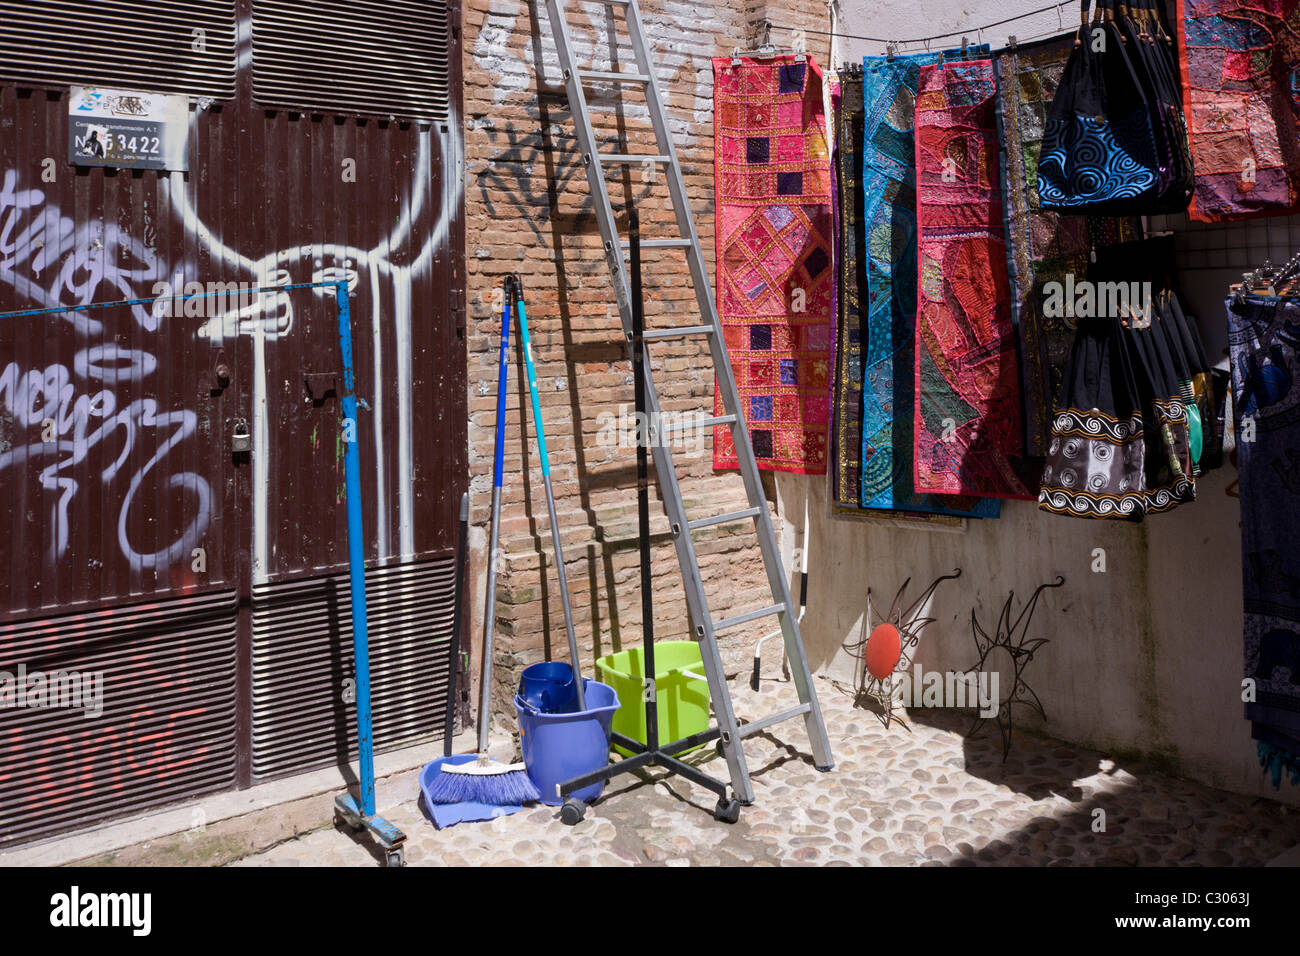 Cleaning materials and Moorish clothing styles in a street corner of the Arabic Albaicon quarter. Stock Photo